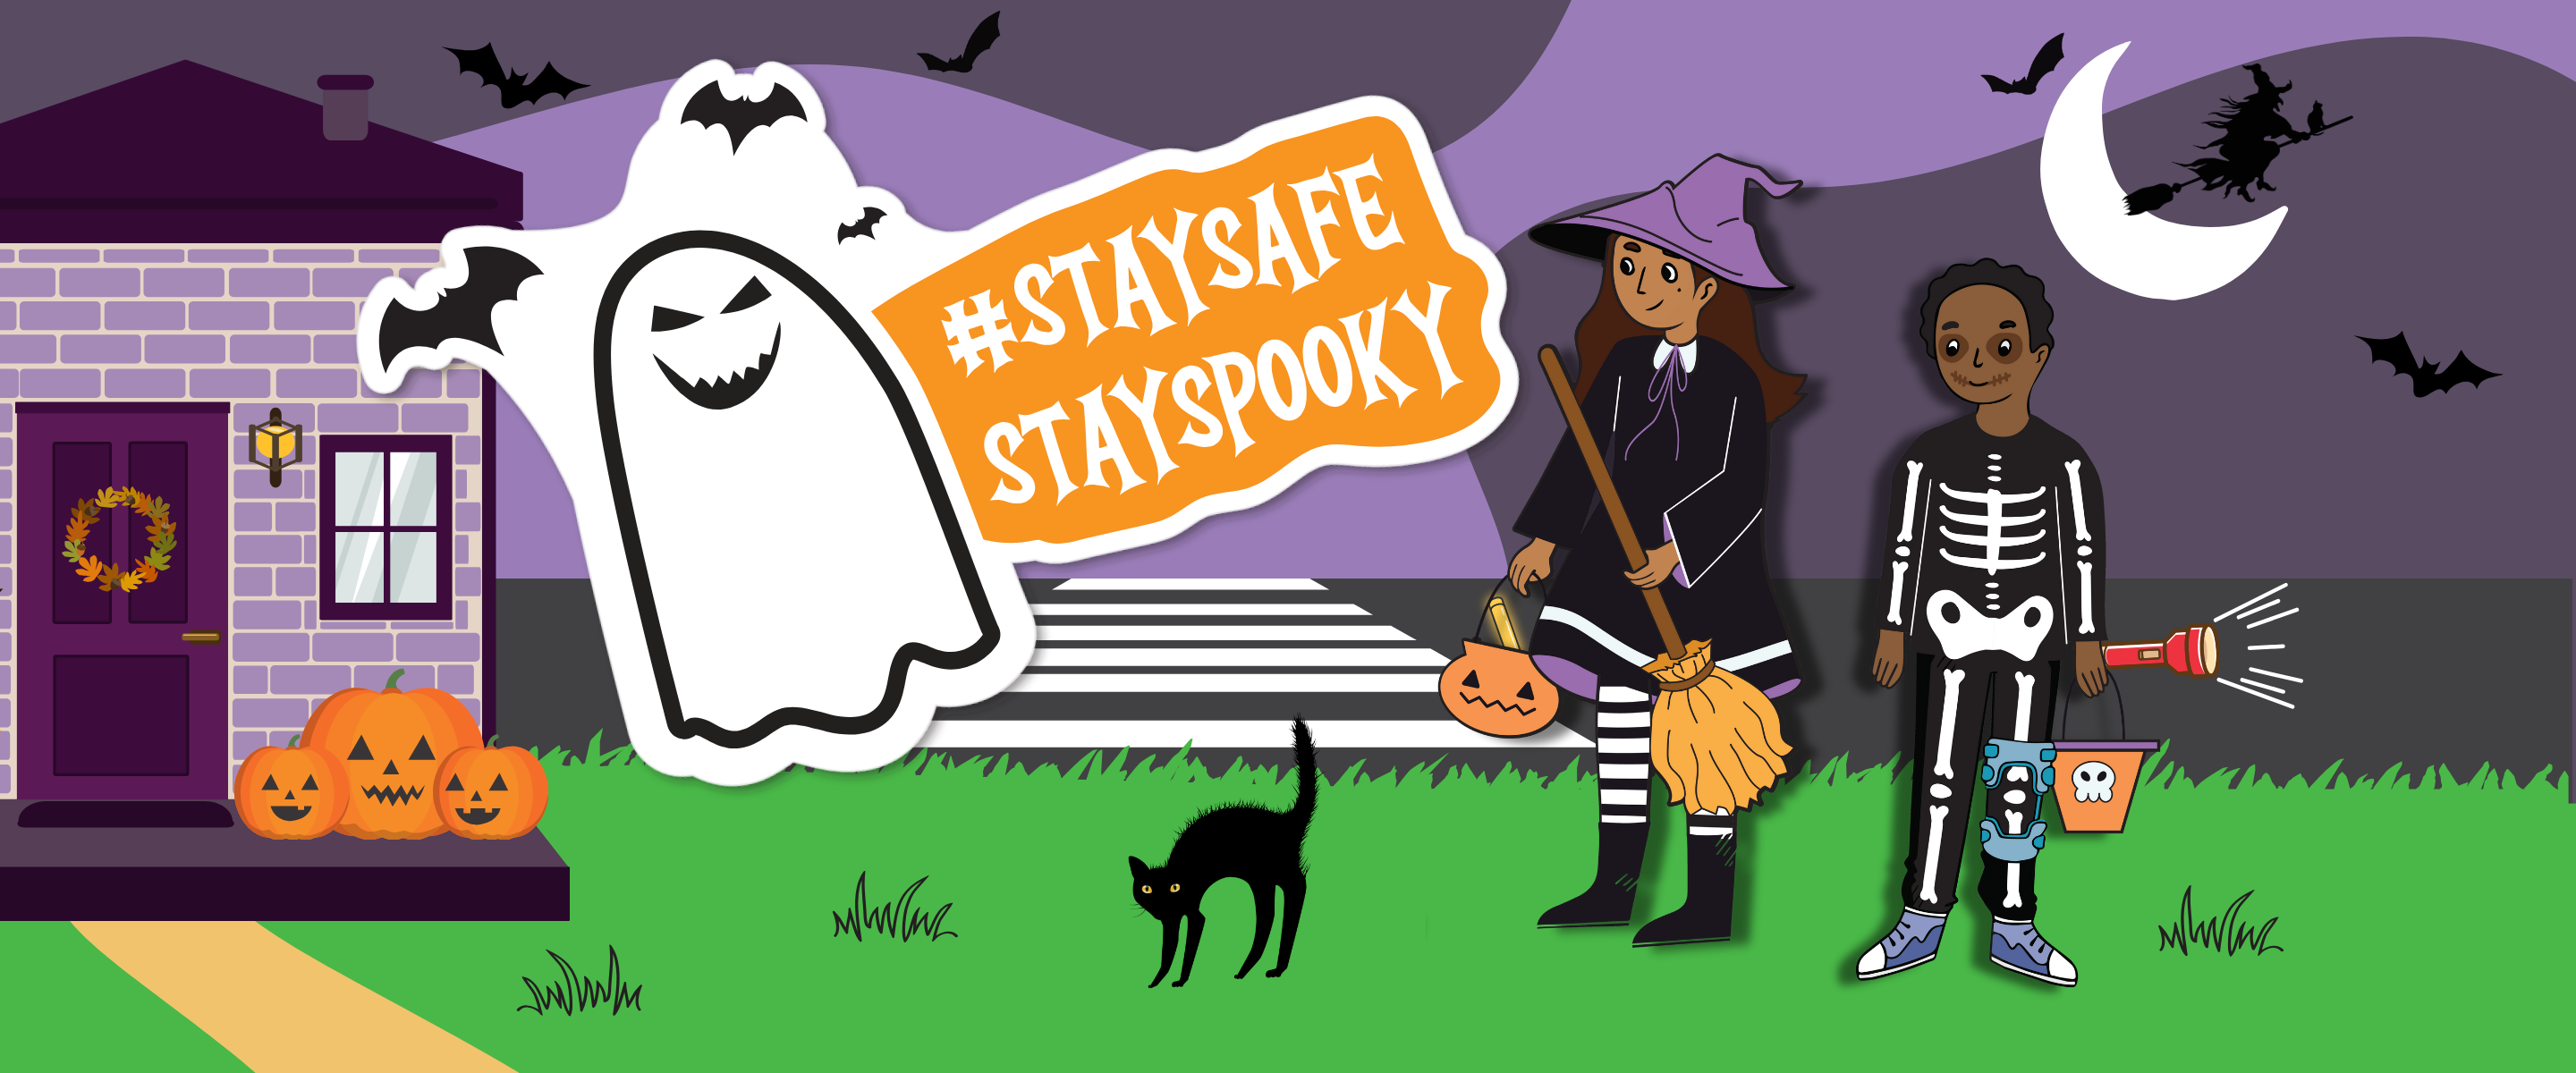 A cartoon Halloween themed scene, including a house with jack-o-lanterns out front on the porch, a dark night sky, and two kids, one dressed as a witch and another a skeleton, trick or treating. A large sticker placed on top of the scene has a ghost and reads #StaySafeStaySpooky